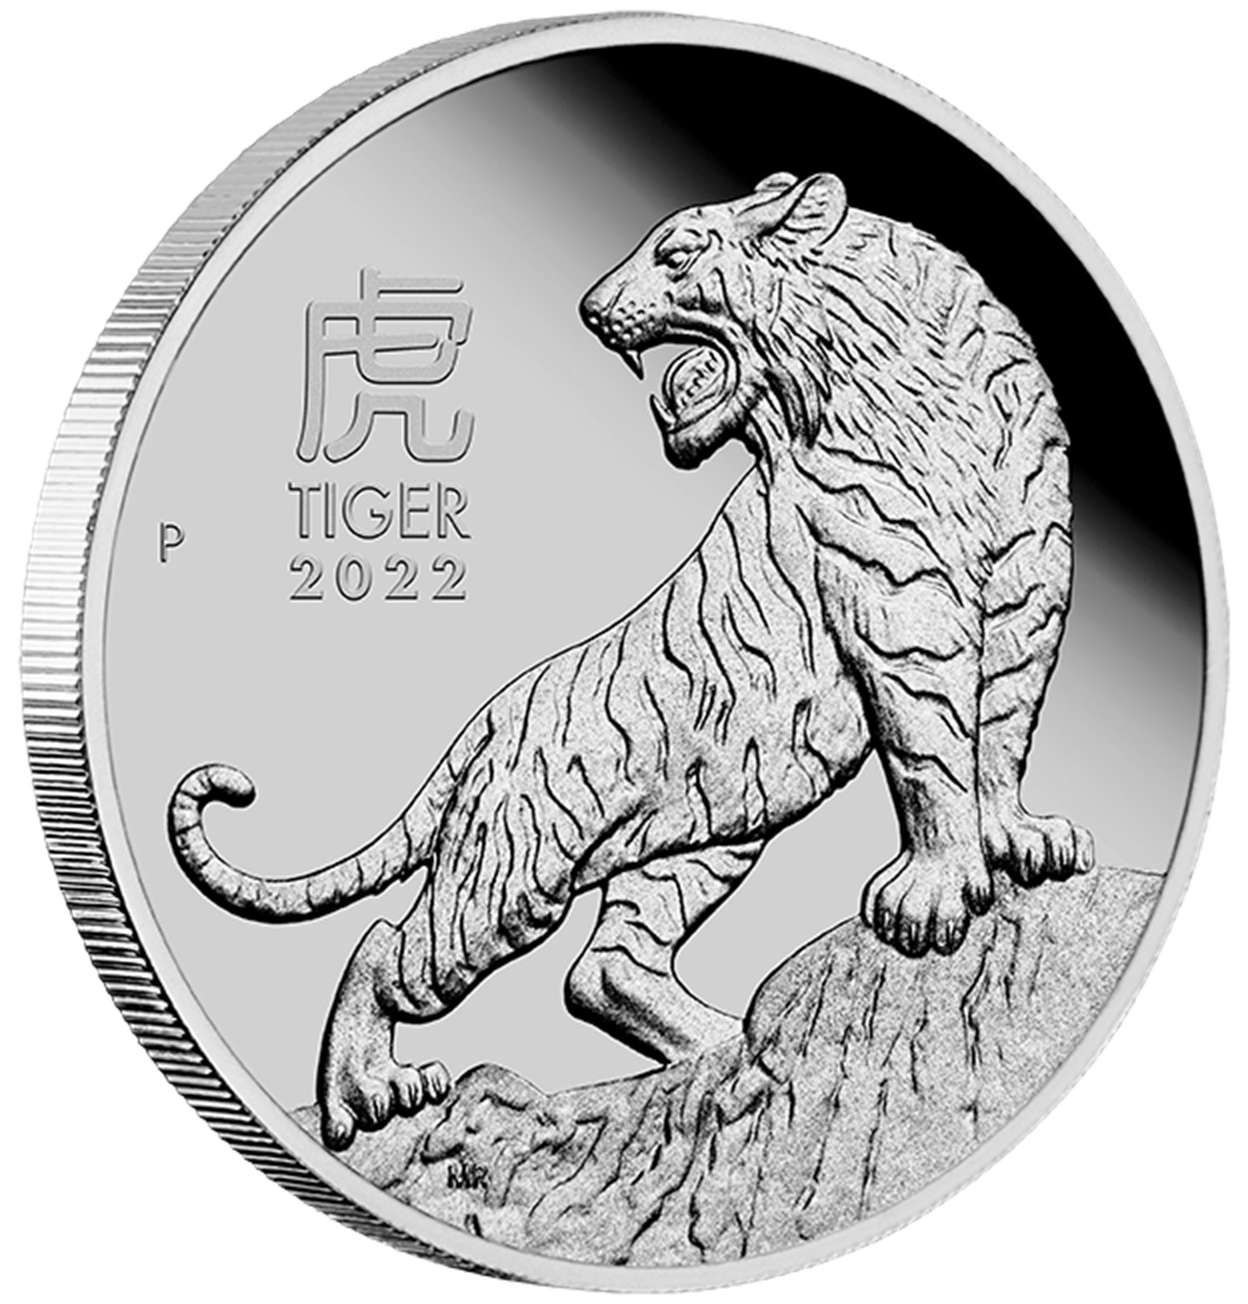 01 2022 Year of the Tiger 1oz Platinum Proof Coin OnEdge LowRes